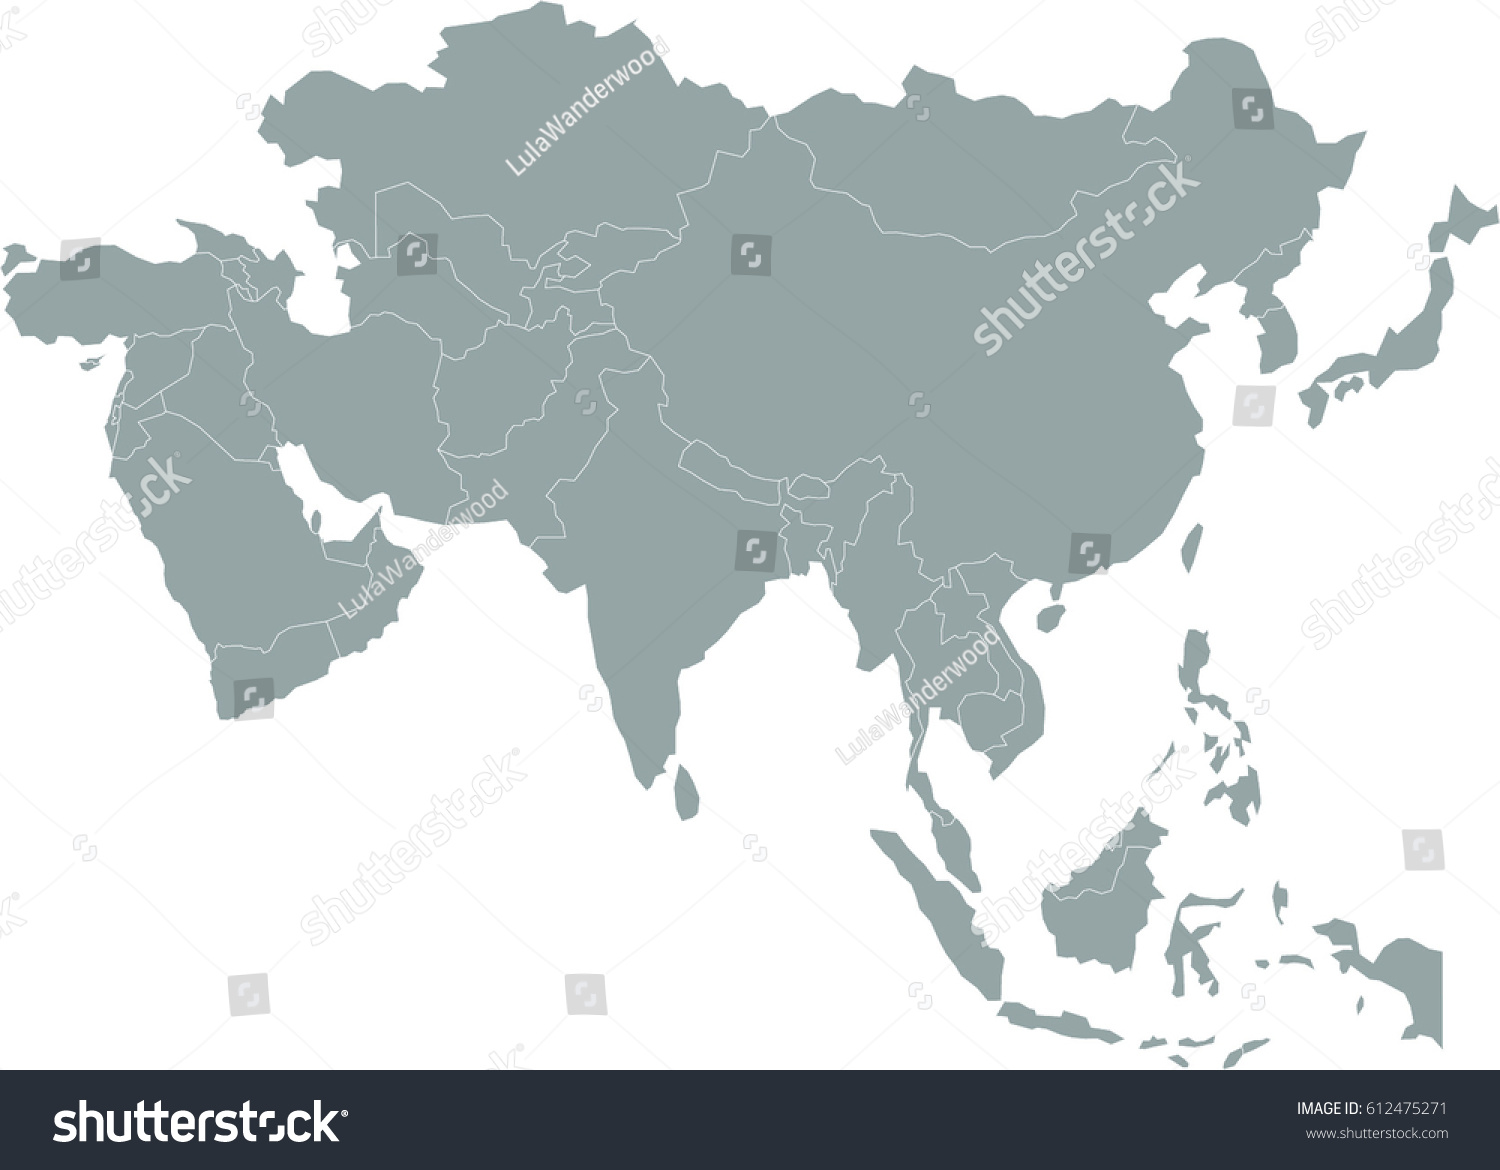 Simple Gray Asia Map Stock Vector Royalty Free 612475271